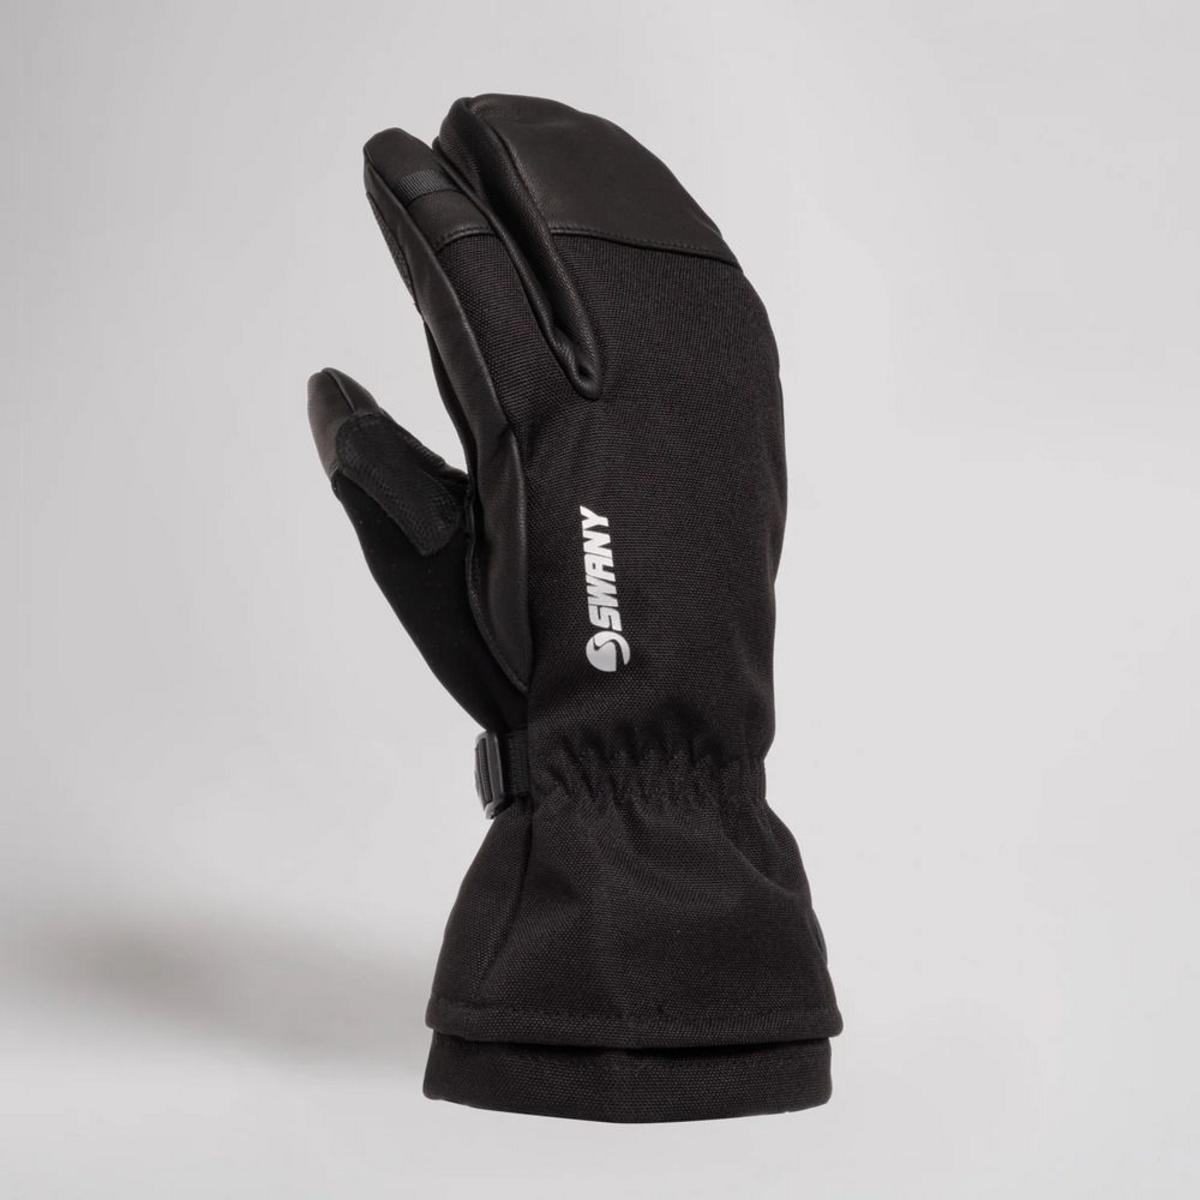 Swany Women's 970 3N1 Trigger Mittens 2.3